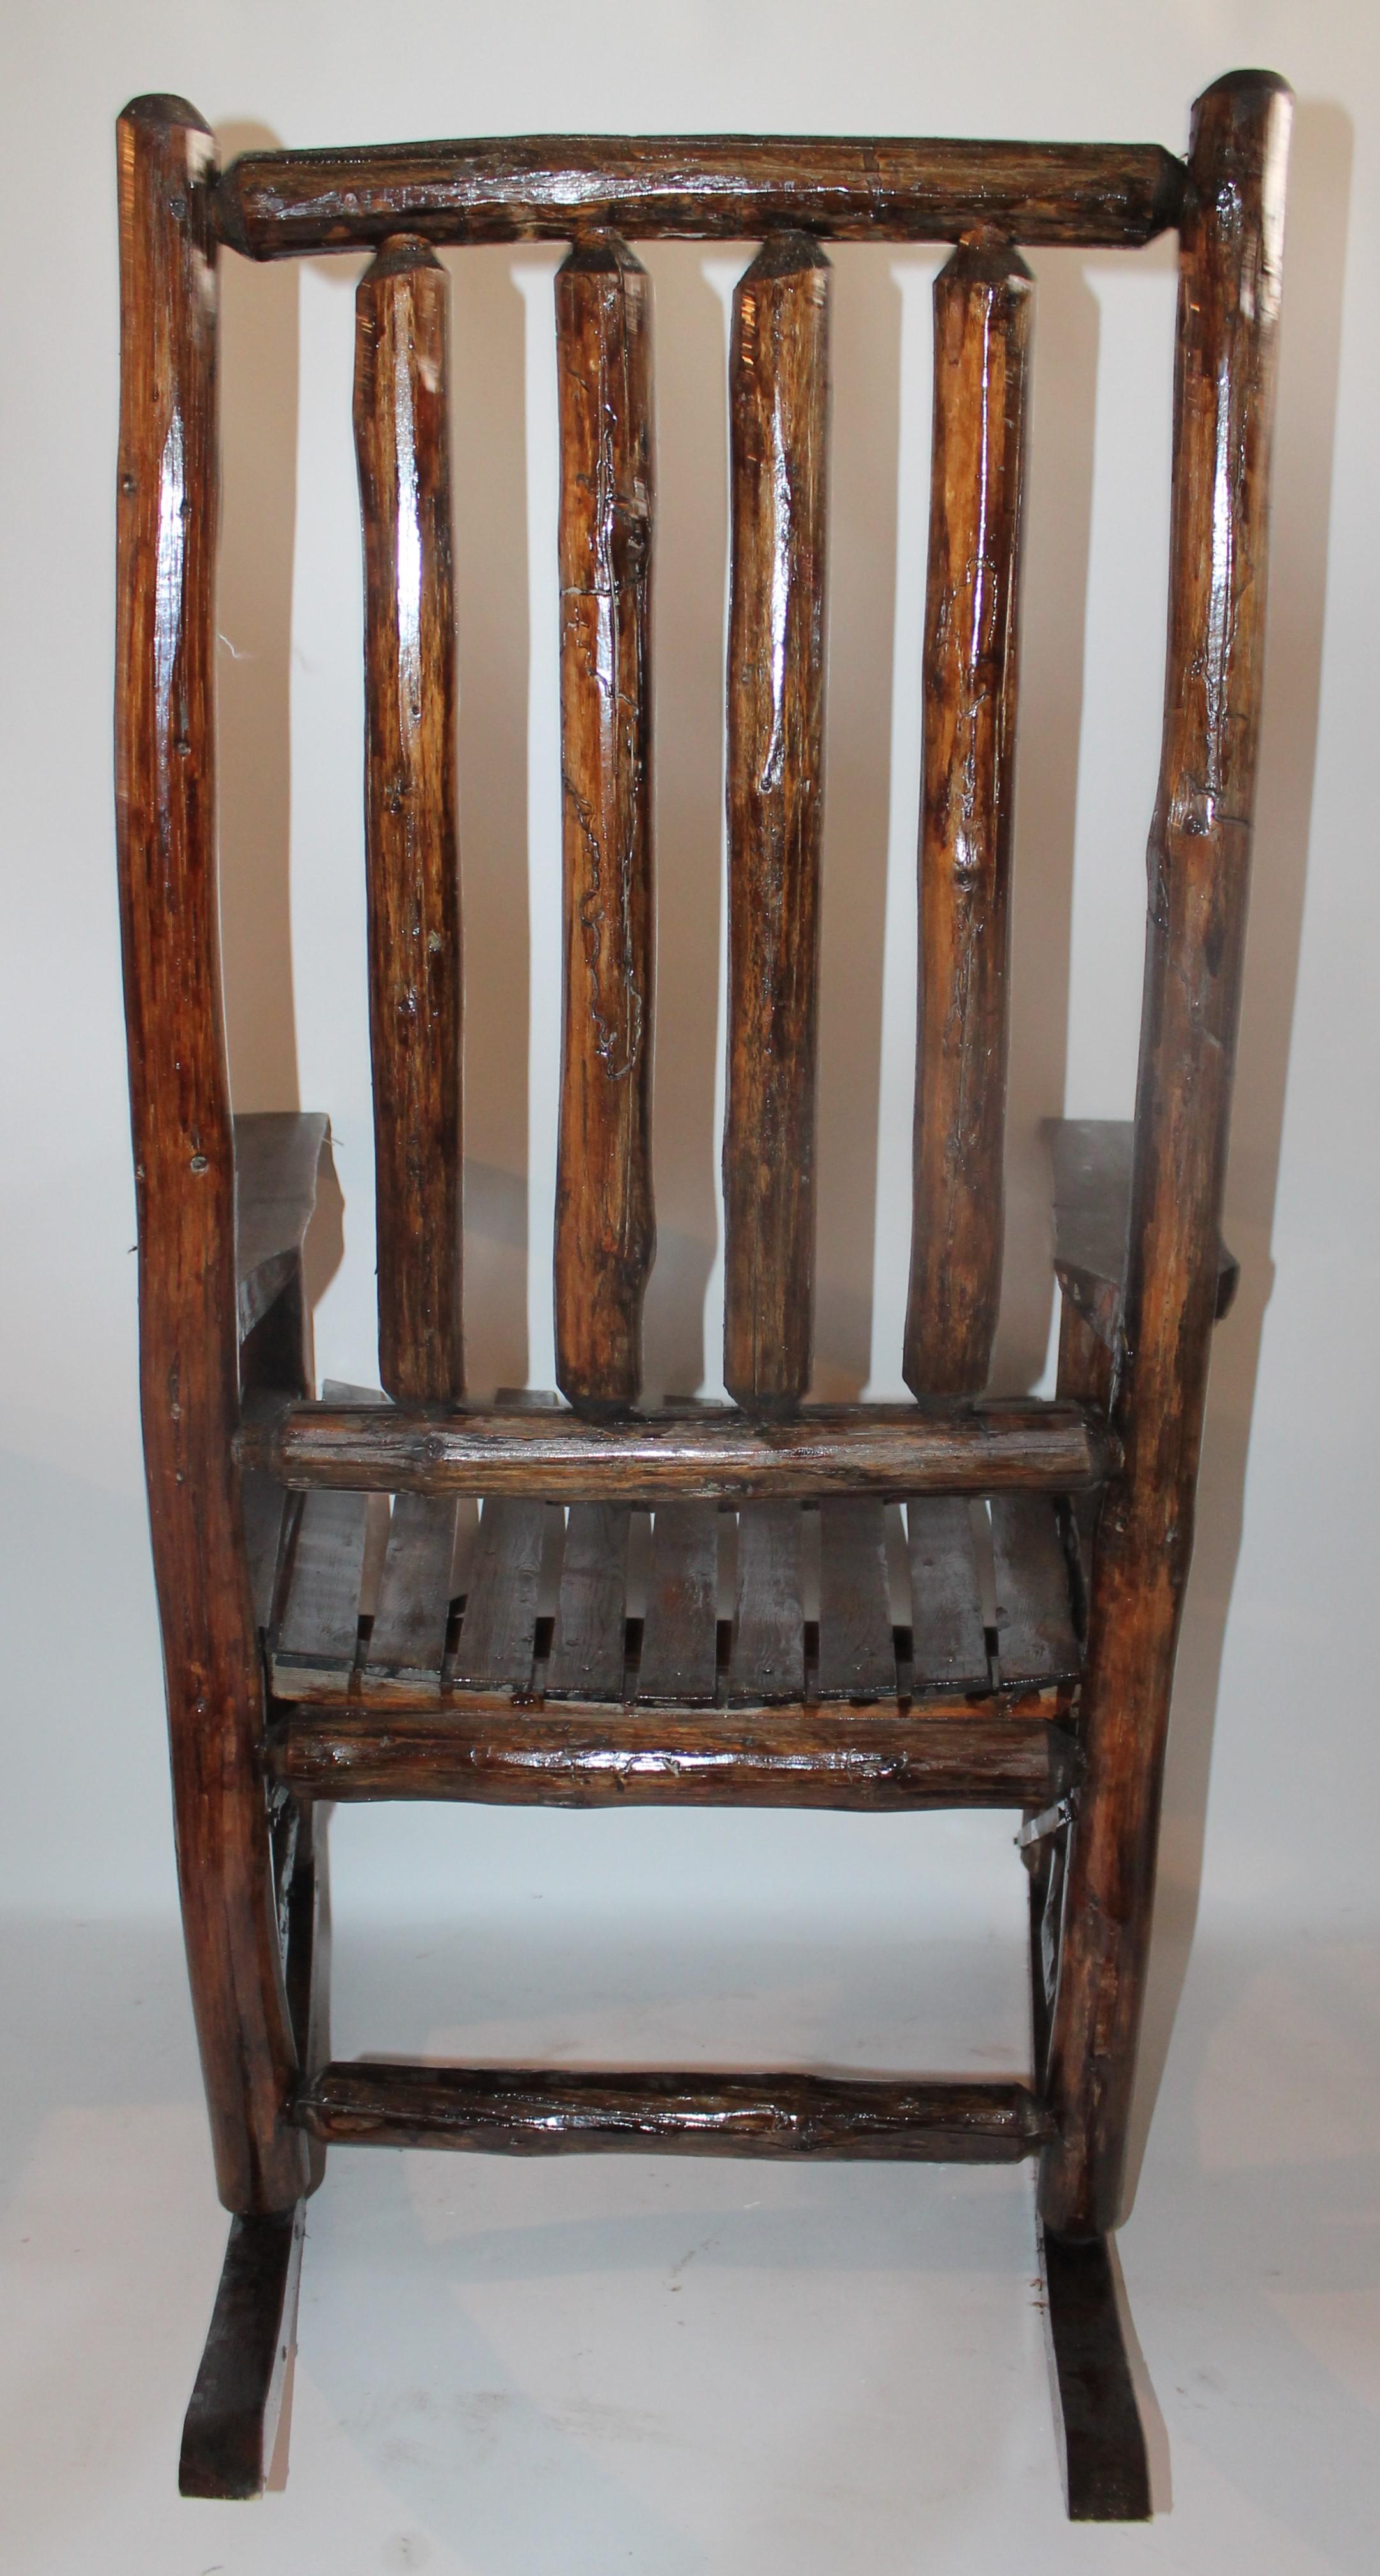 Hand-Crafted Old Hickory Porch Rocking Chair